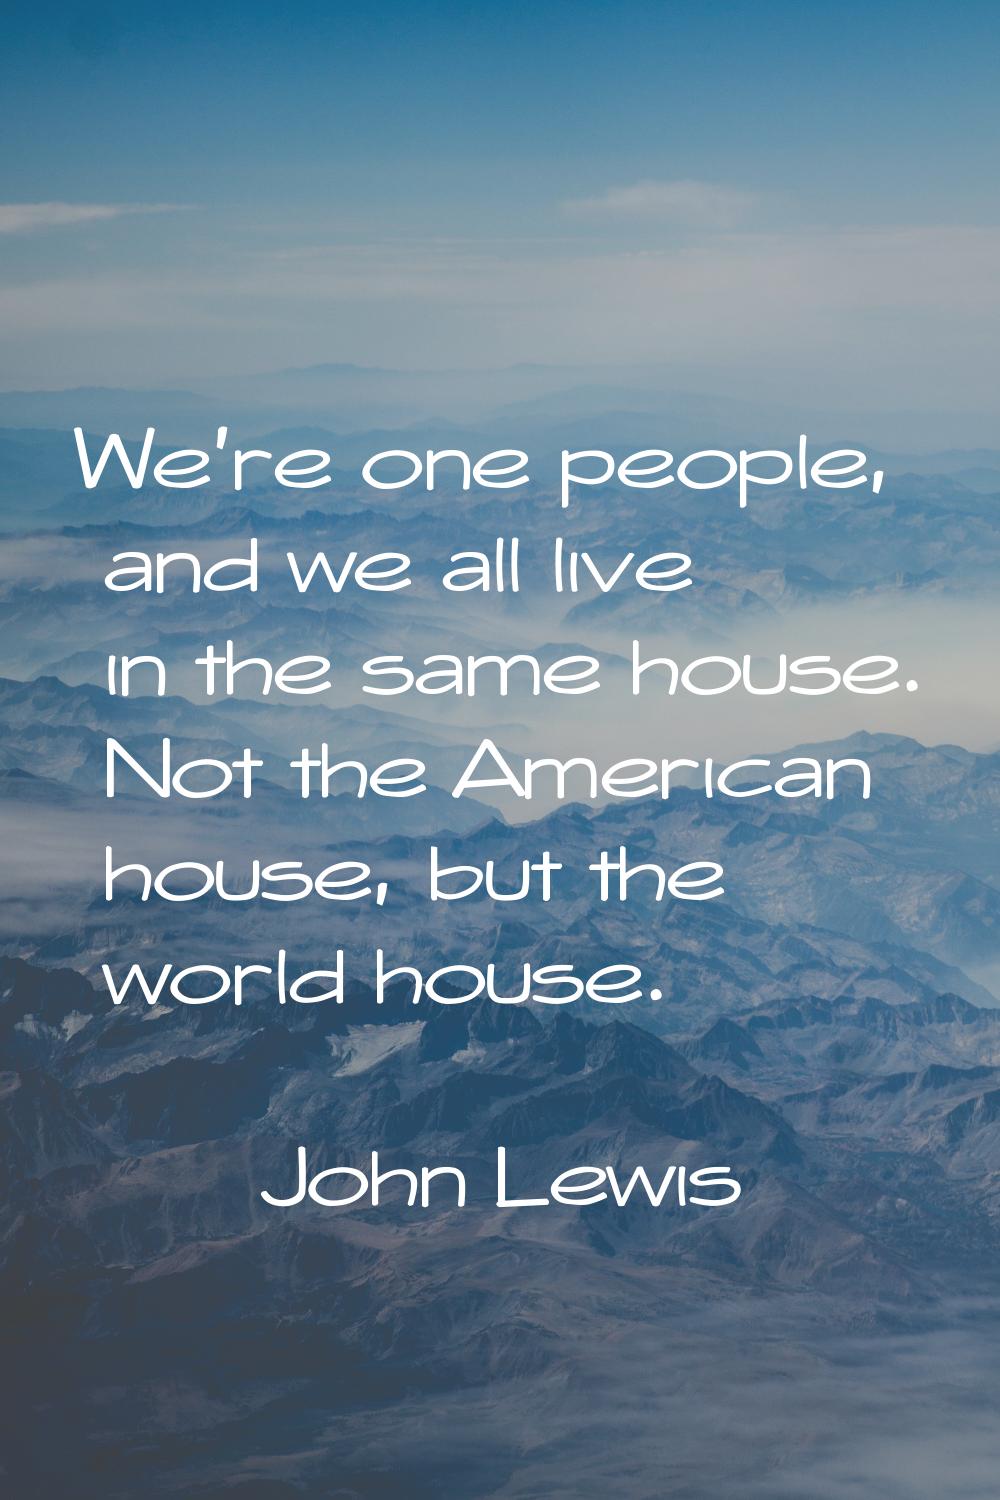 We're one people, and we all live in the same house. Not the American house, but the world house.